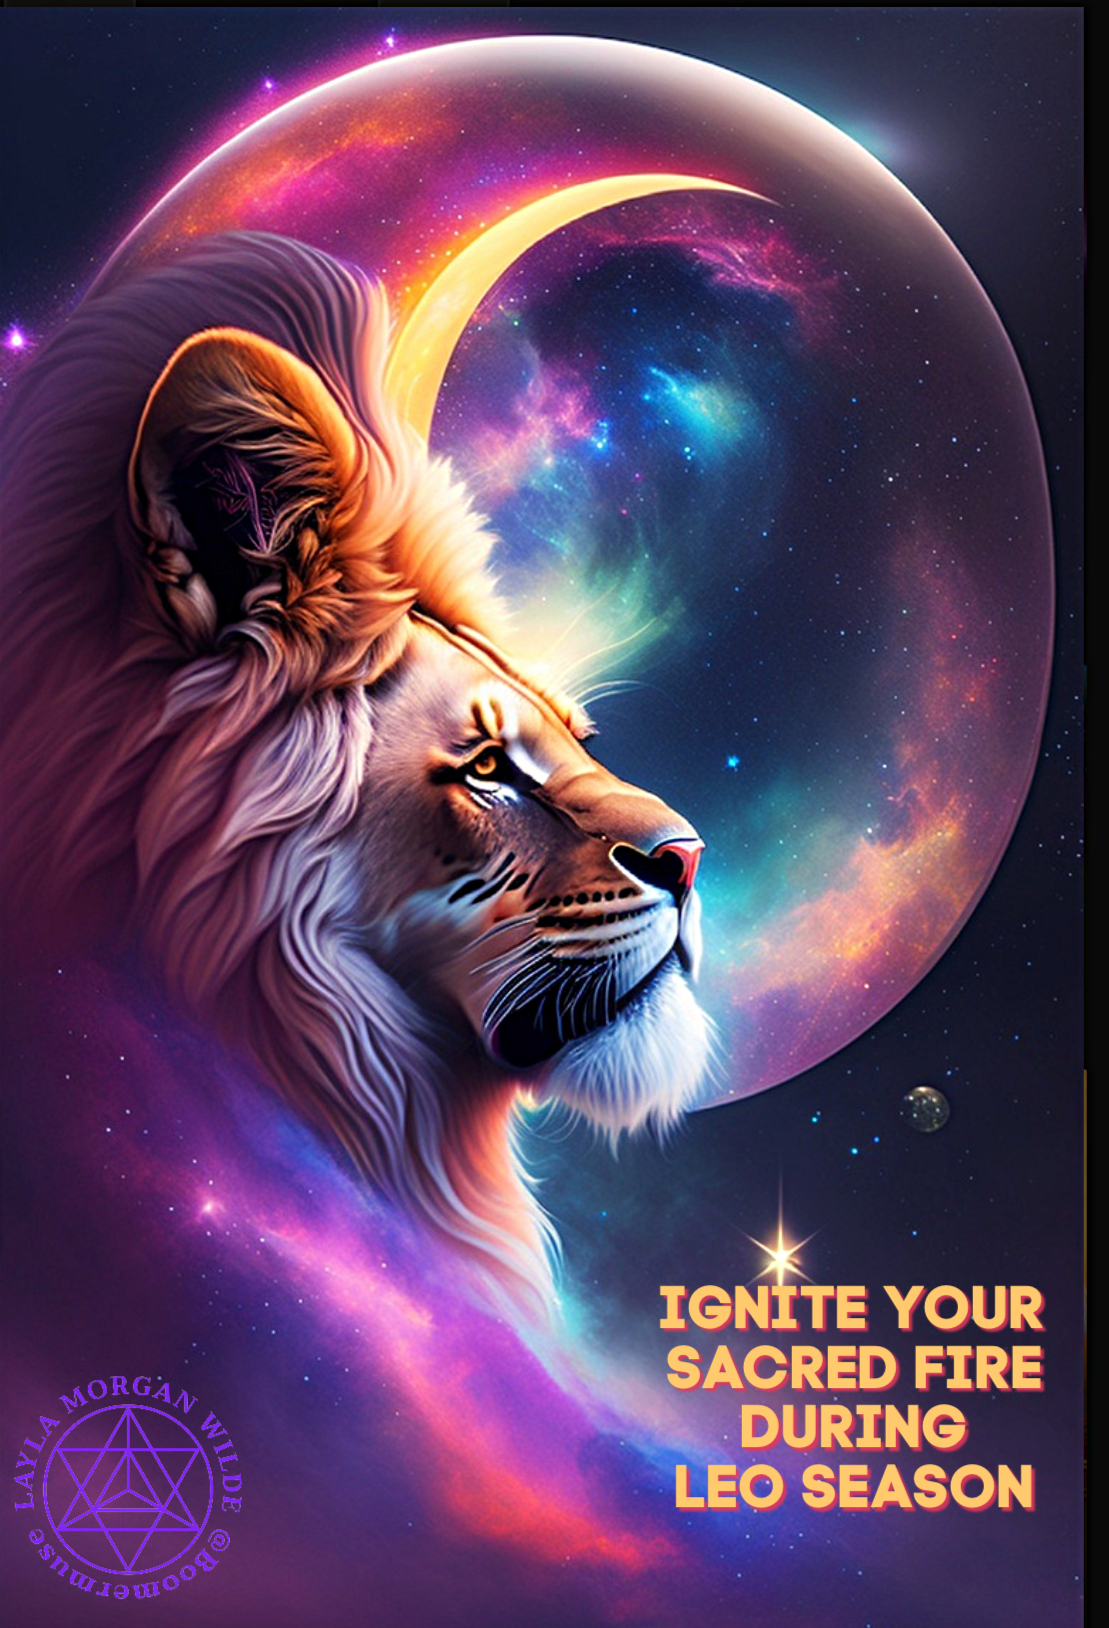 Ignite your sacred fire during Leo season 